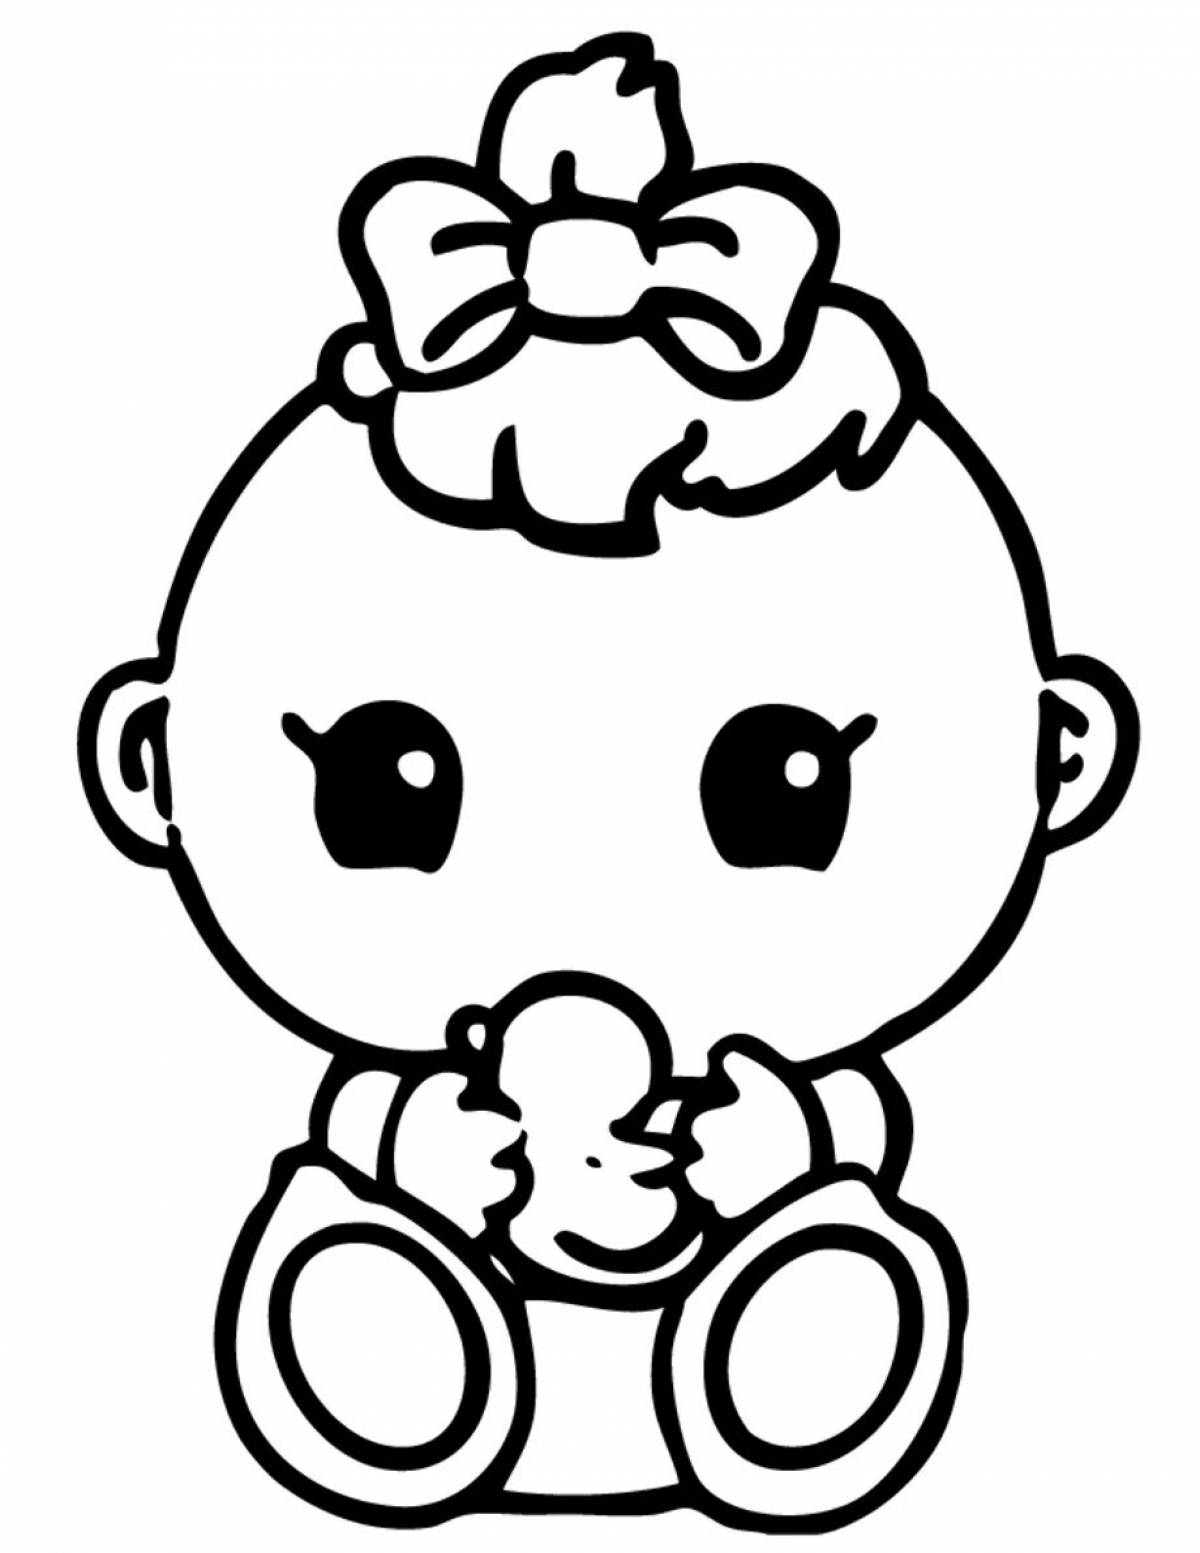 Dainty baby dolls coloring book